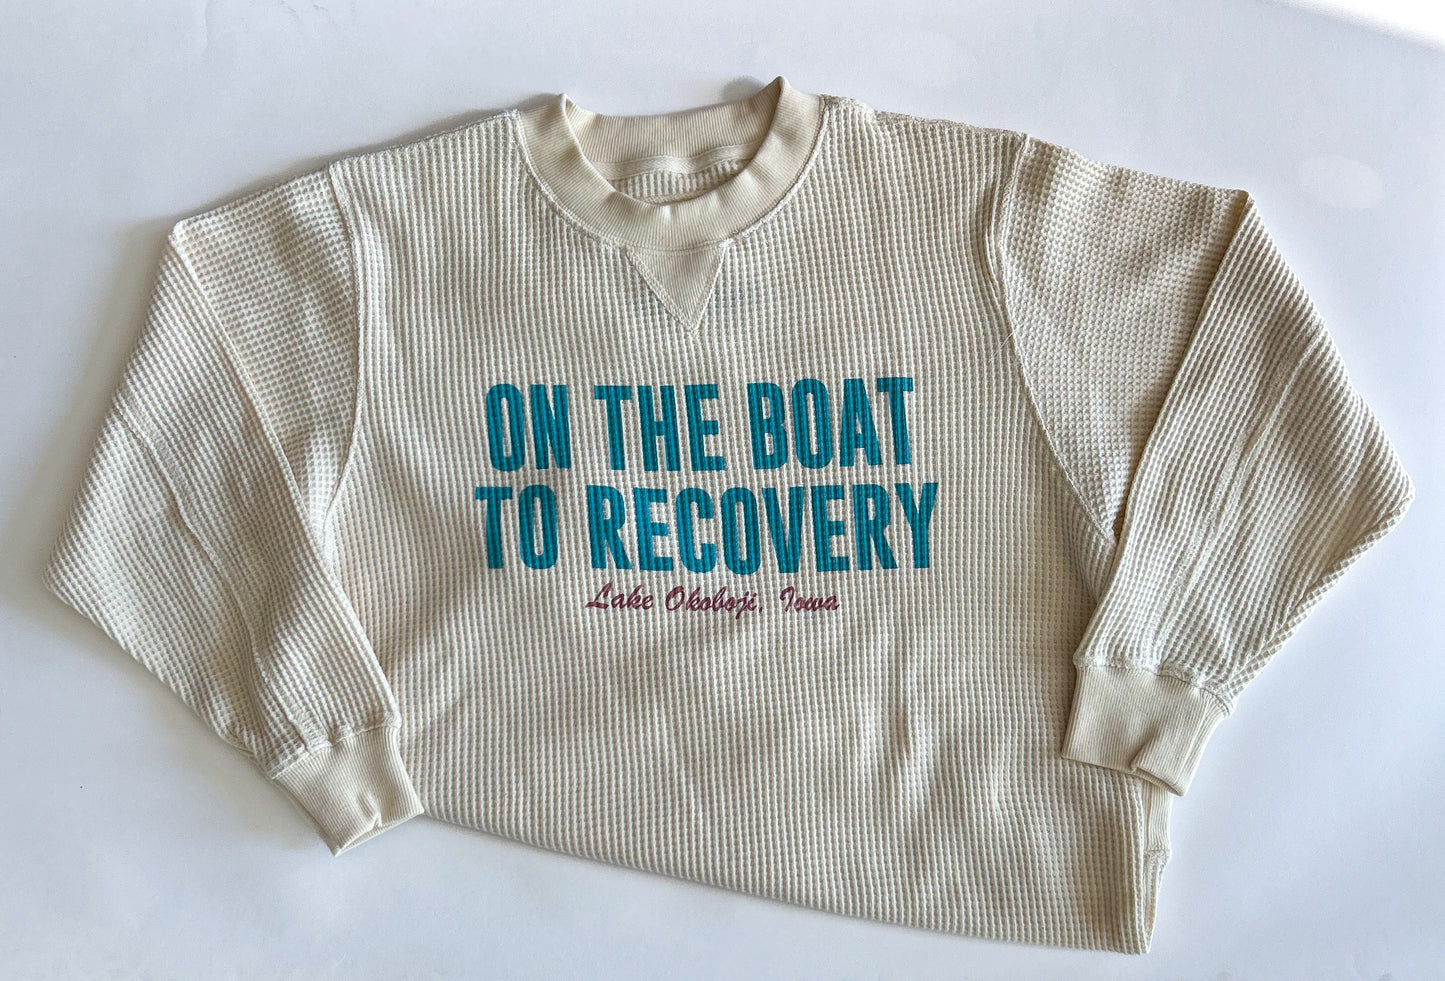 BOAT TO RECOVERY WAFFLE CREWNECK